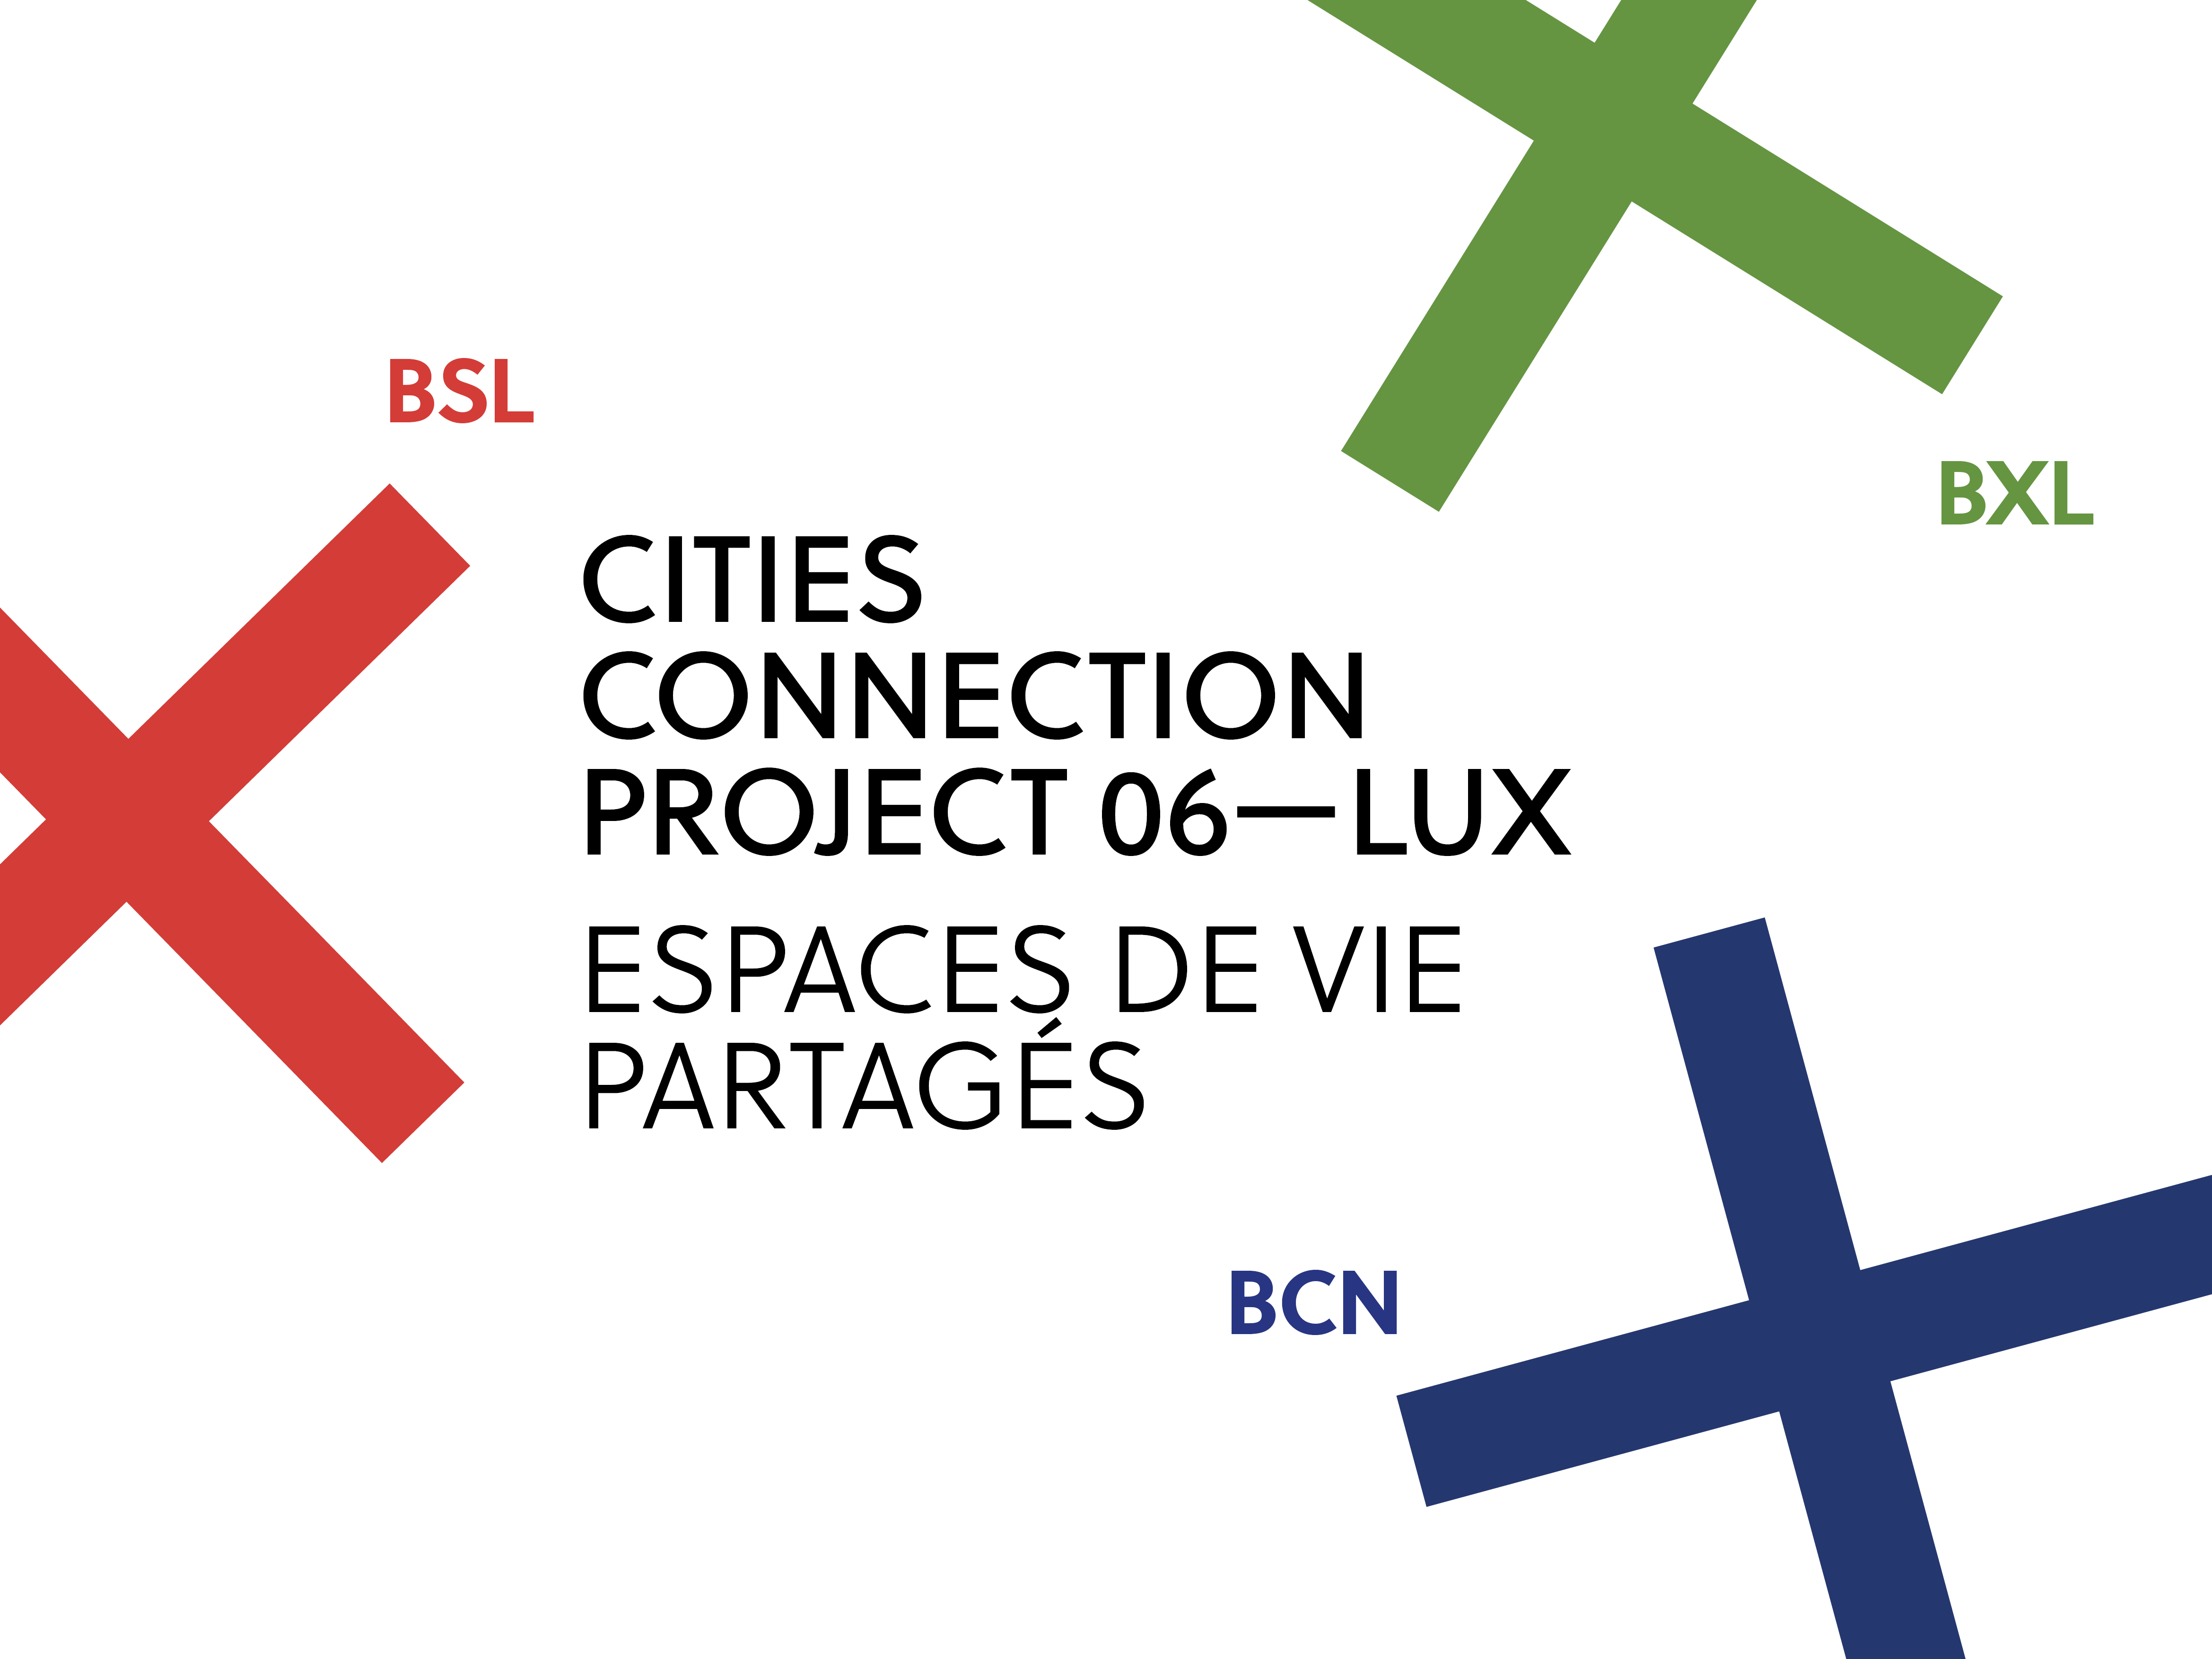 Exhibition "Cities Connection Project 06—LUX. Shared living spaces°